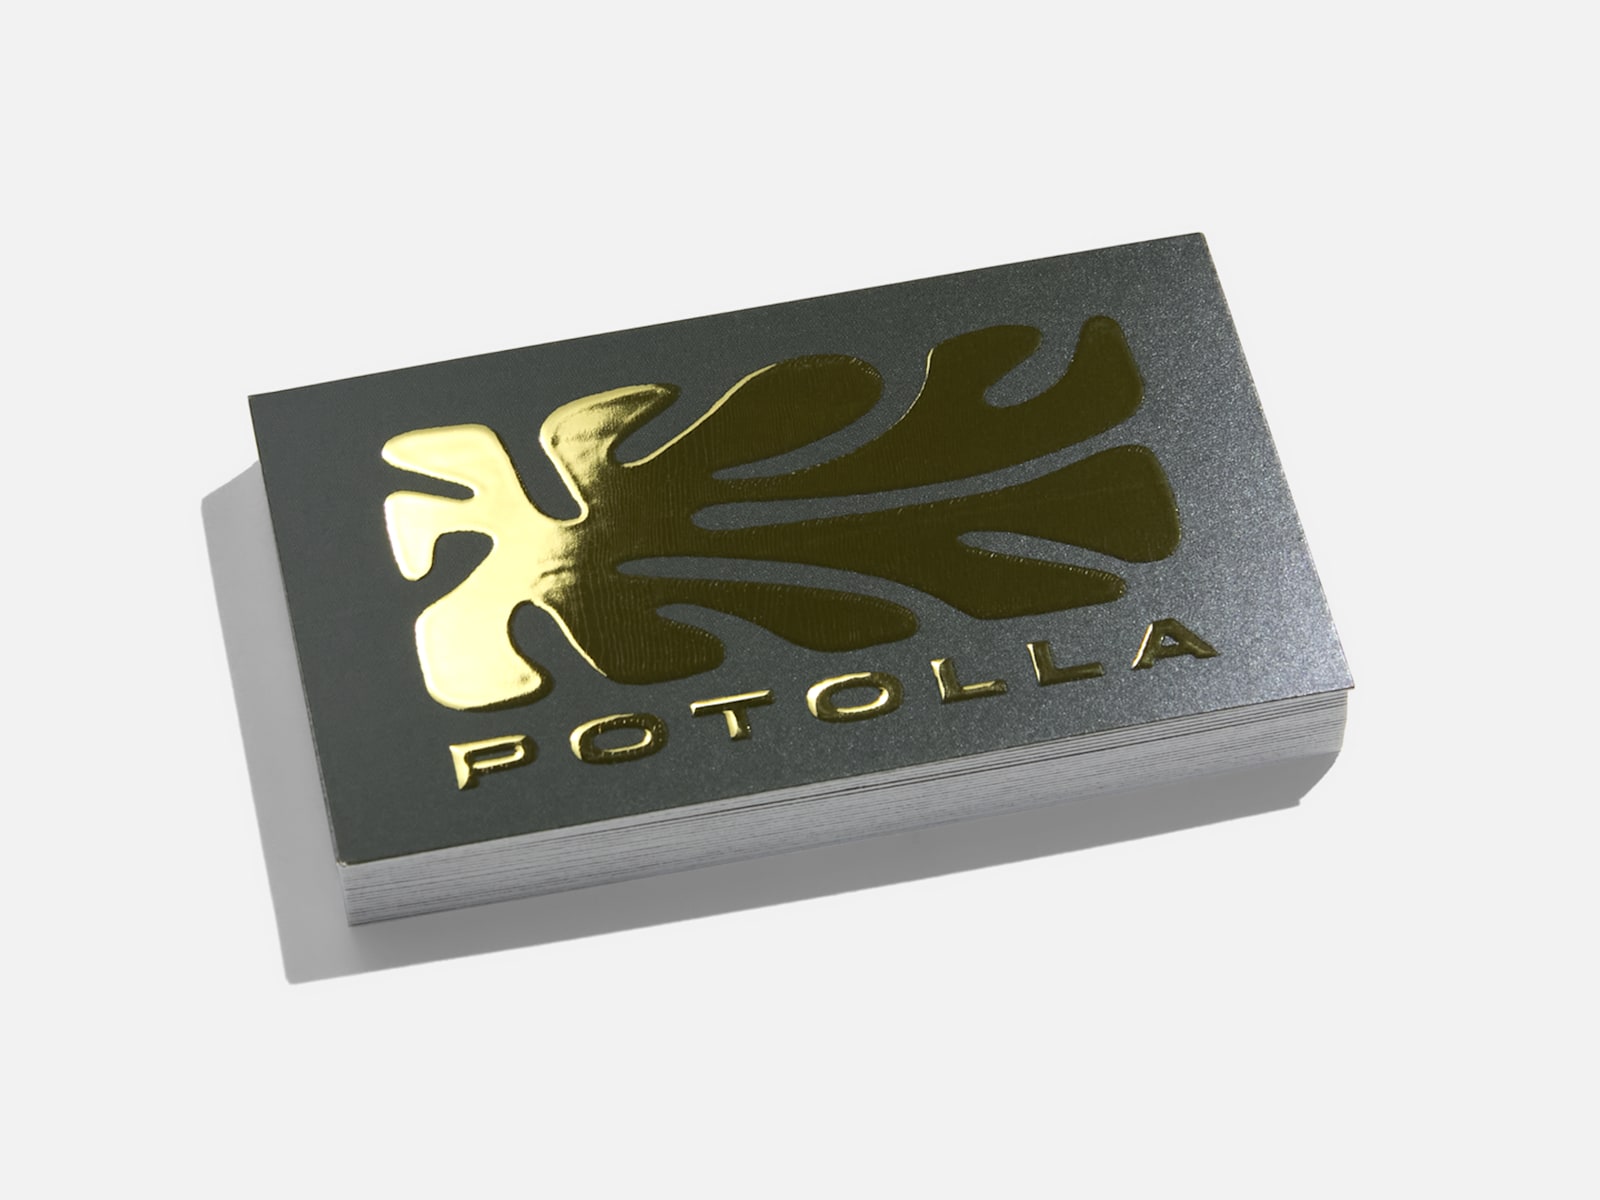 A business card printed with a raised foil logo and text.